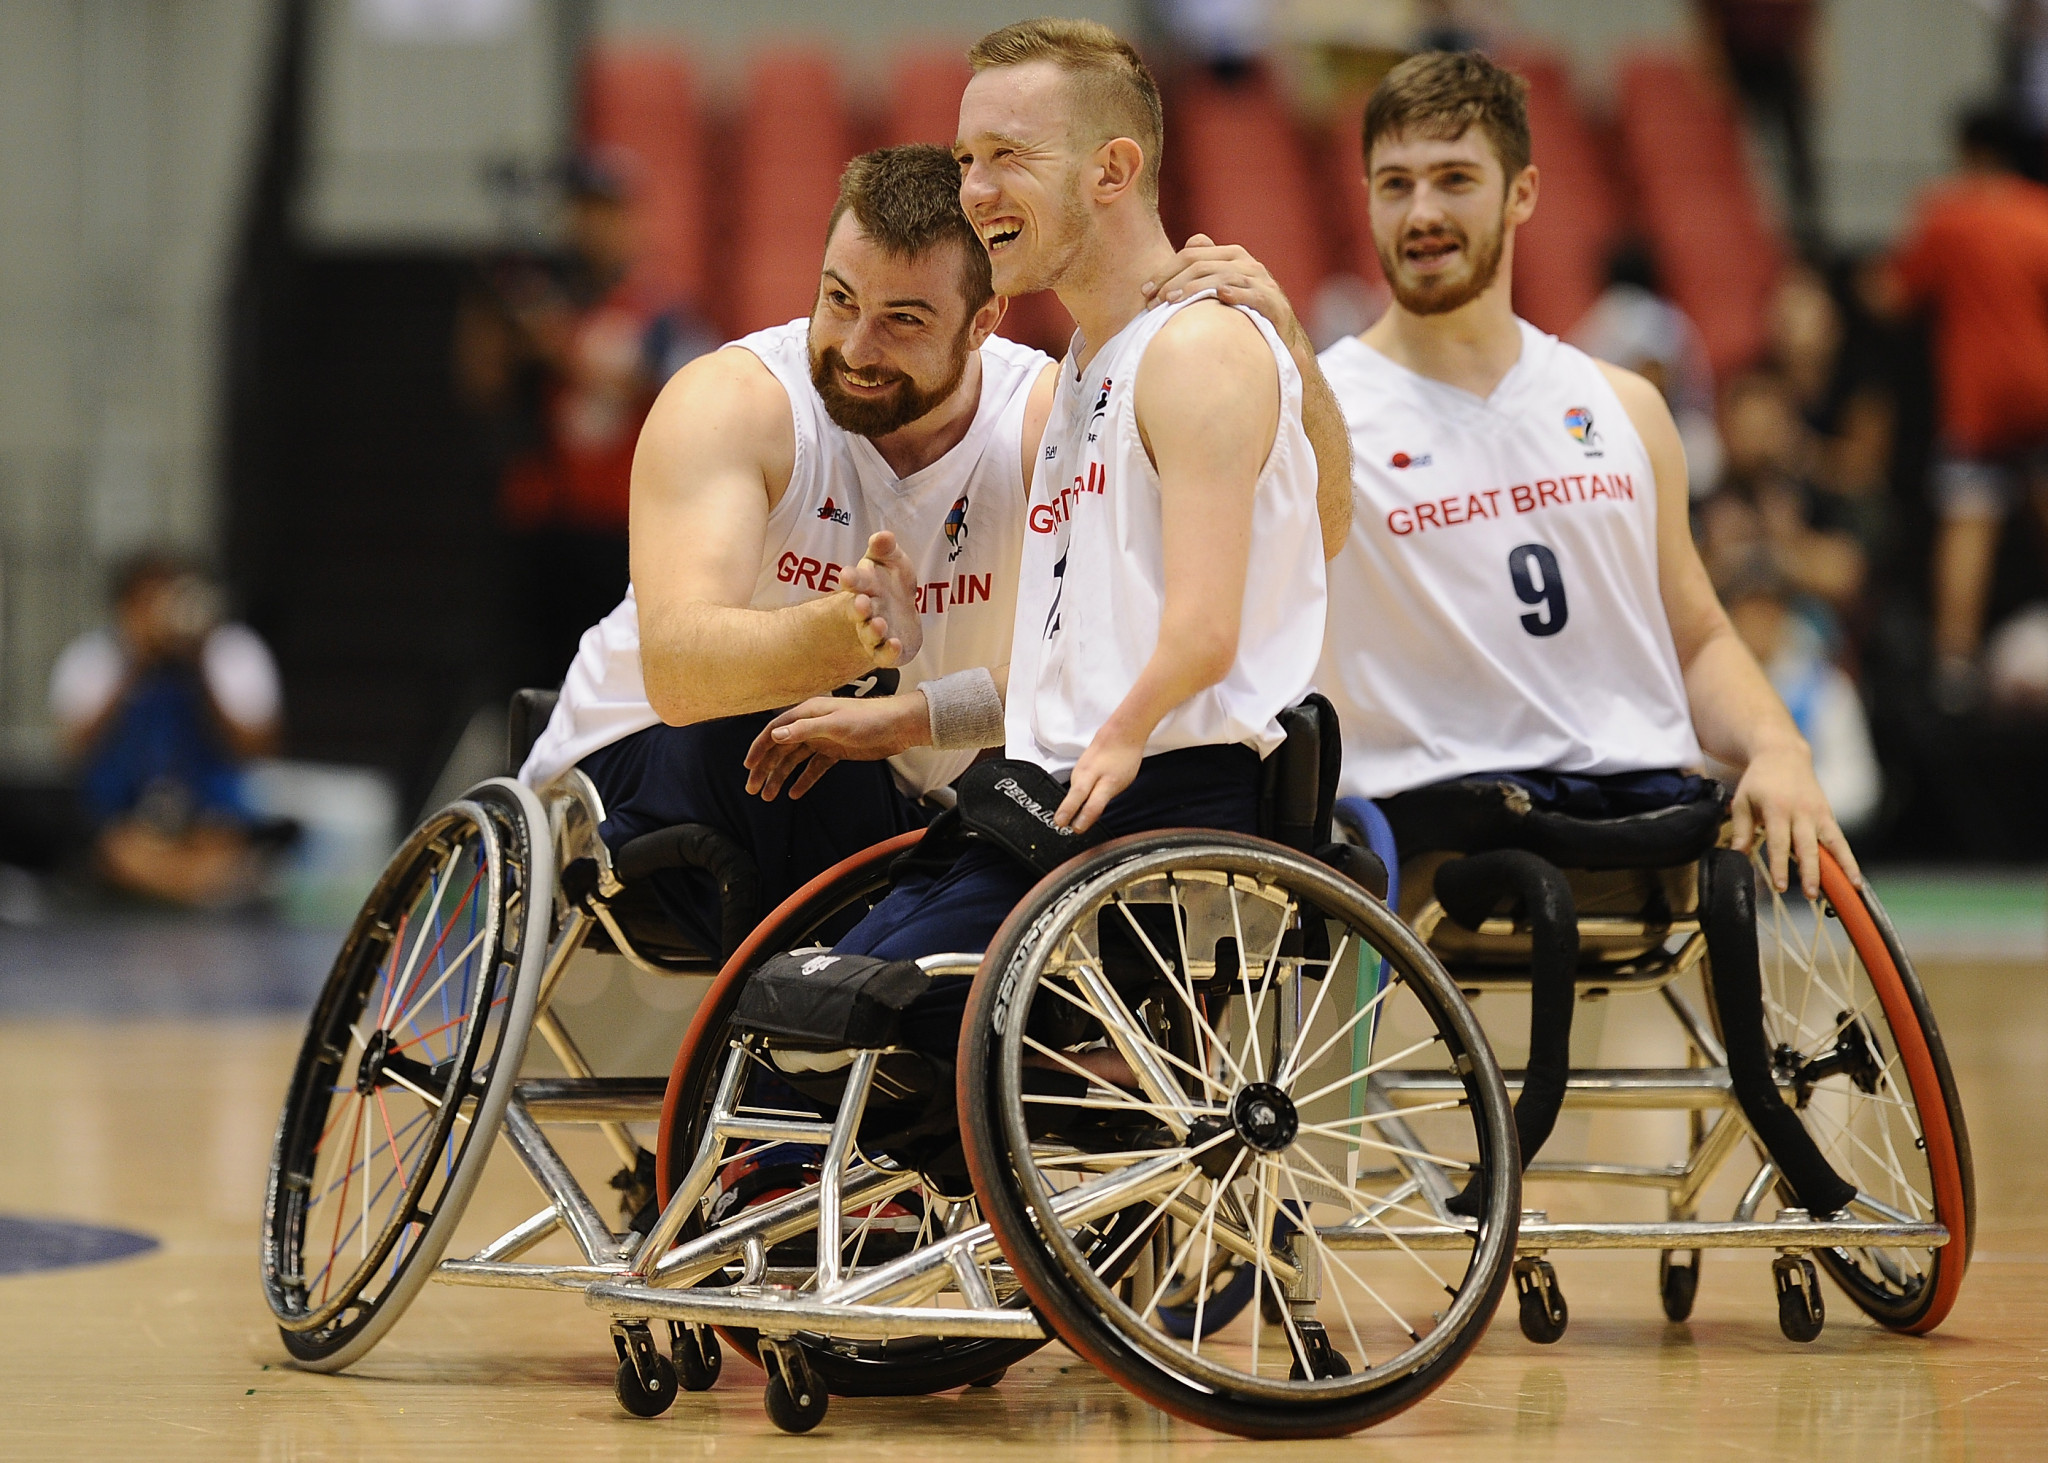 British Wheelchair Basketball hope the appointment will lead to commercial investment in the sport ©Getty Images